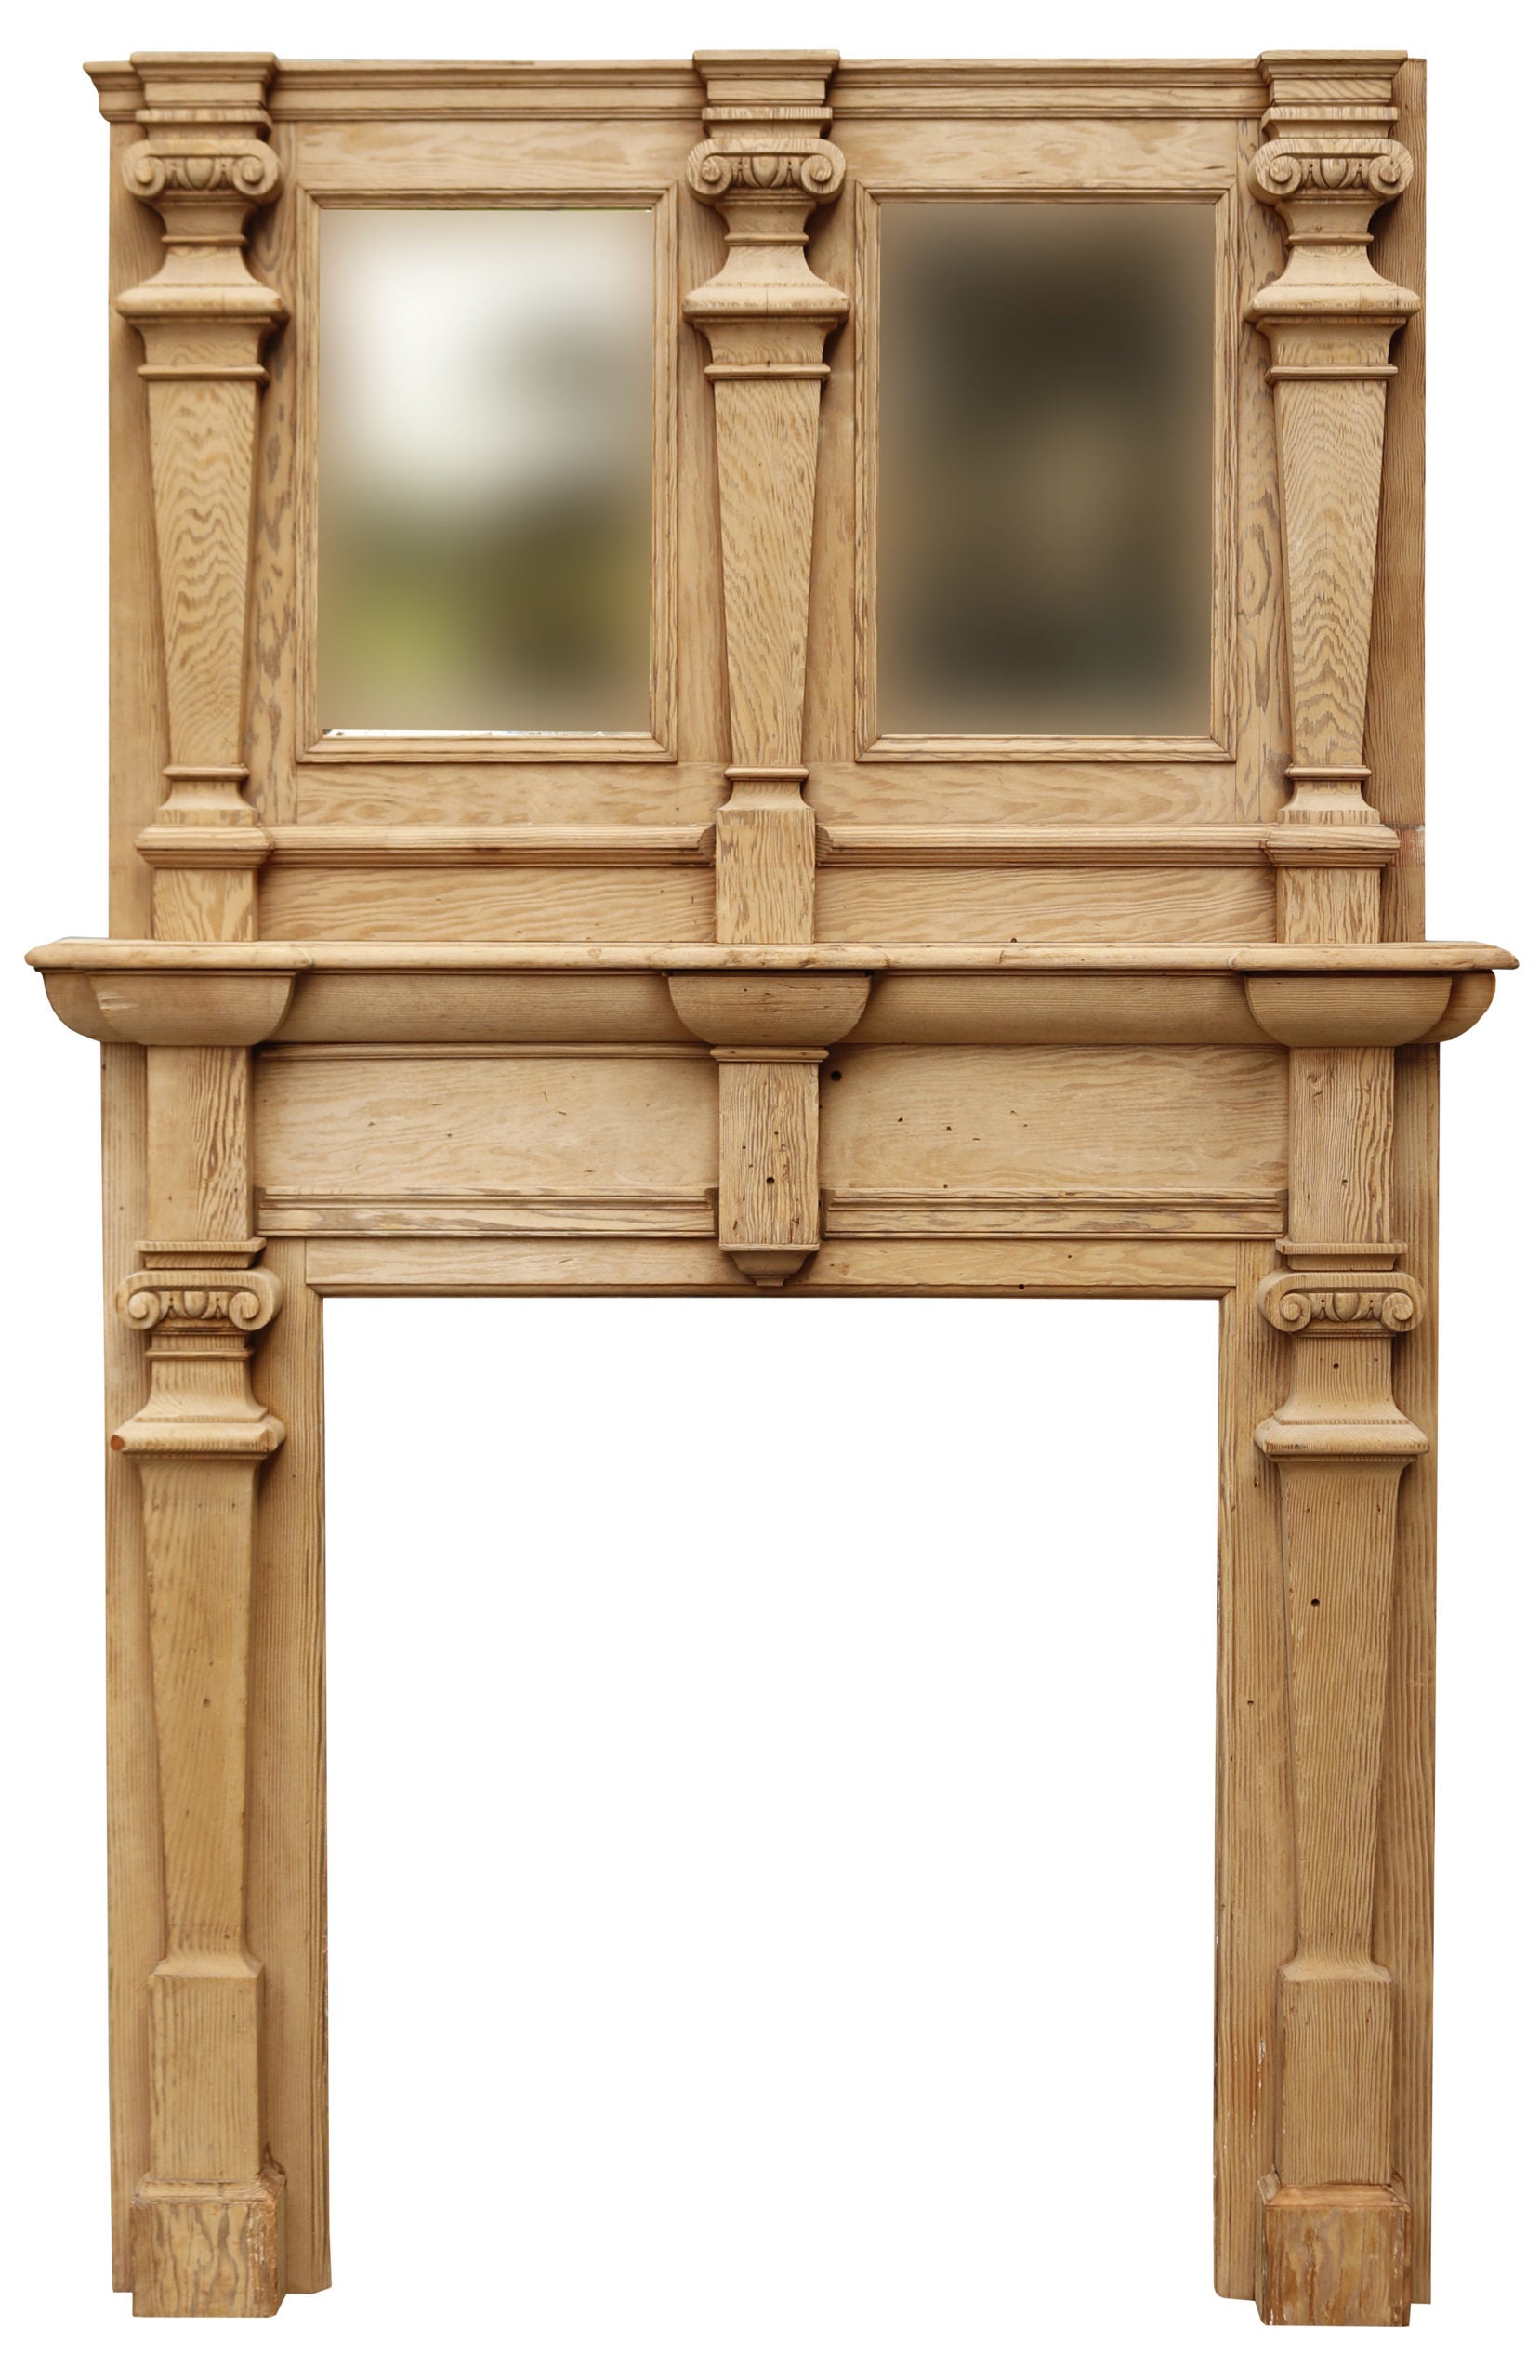 Jacobean Style Fireplace with Mirrored Mantel Piece For Sale